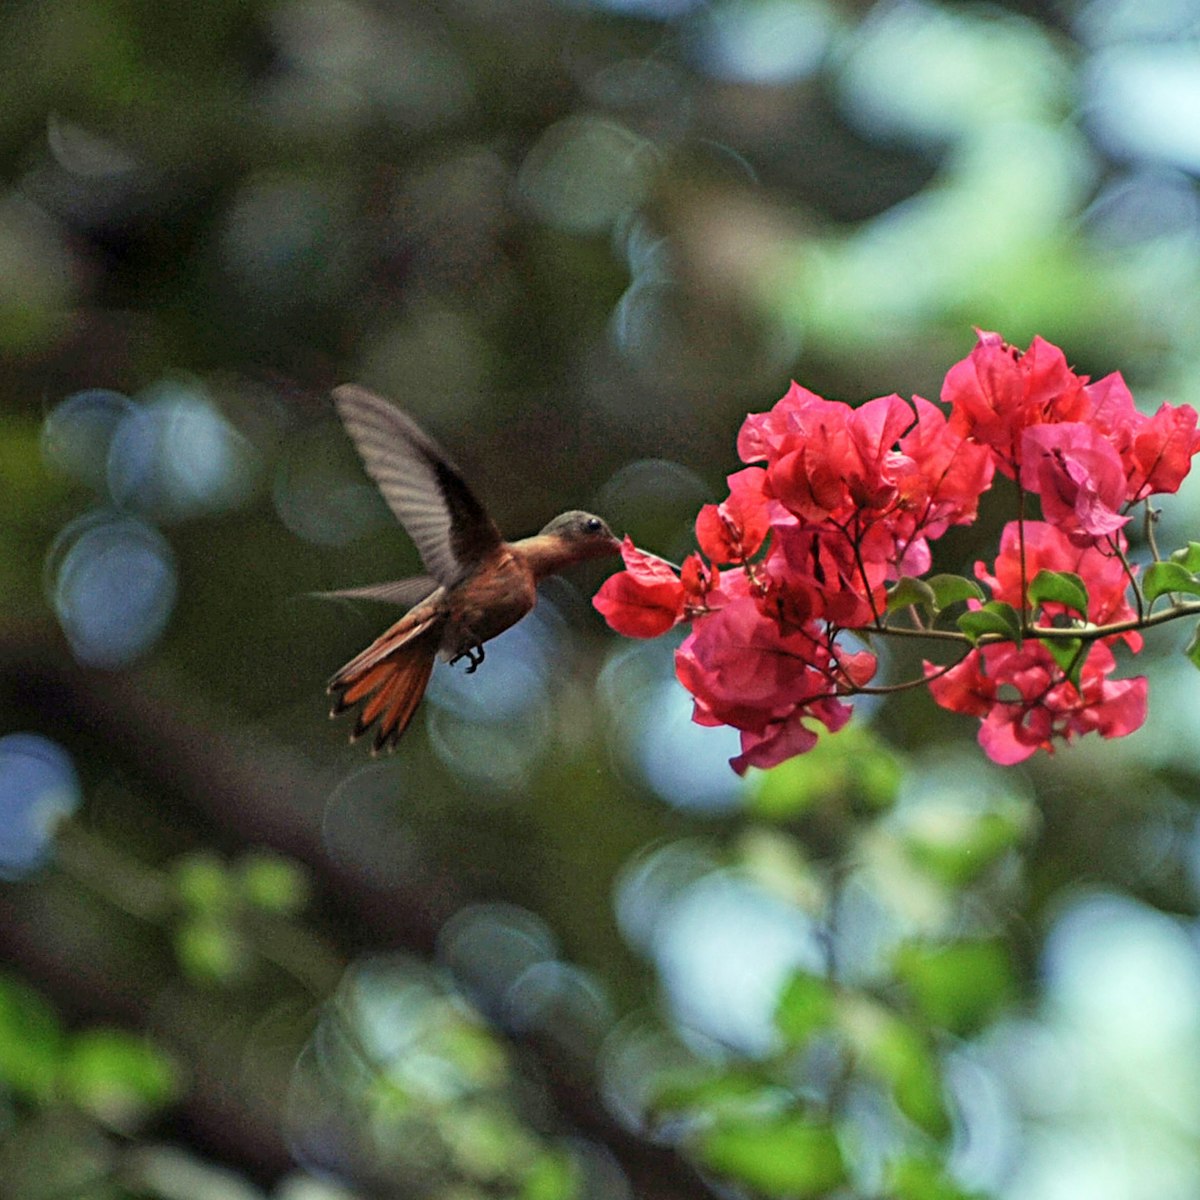 A Cinnamon Hummingbird (Amazilia rutila) is seen at the National Arboretum in Managua, on March 28, 2012. Created in 1992, this woodland with over 200 species, became an ecological laboratory and oasis for those that want to escape from the heat of the Nicaraguan capital. It receives 15000 students, tourists, and public in general per year. AFP PHOTO / ELMER MARTINEZ (Photo credit should read ELMER MARTINEZ/AFP/Getty Images)